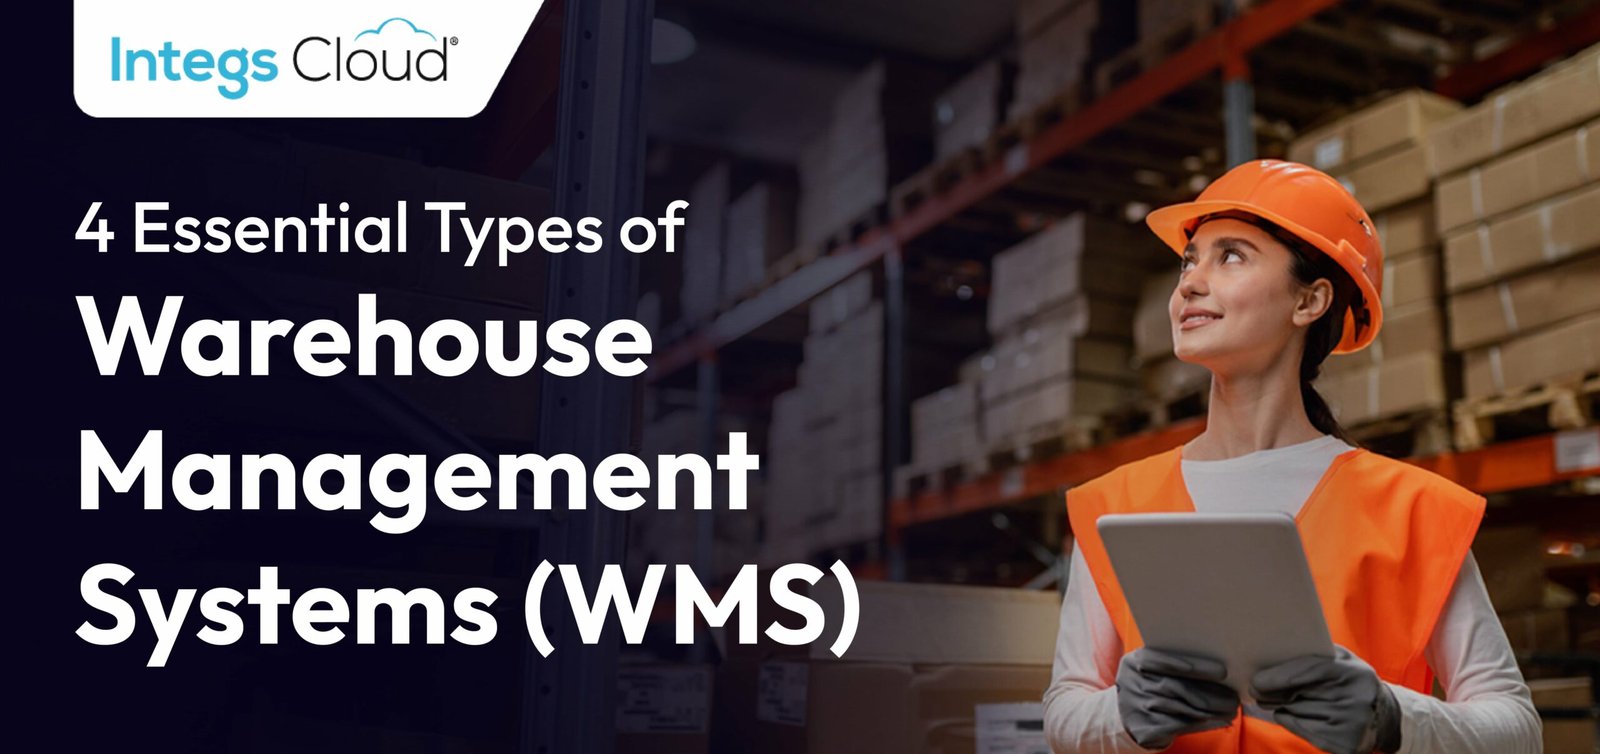 4 Essential Types of Warehouse Management Systems (WMS)